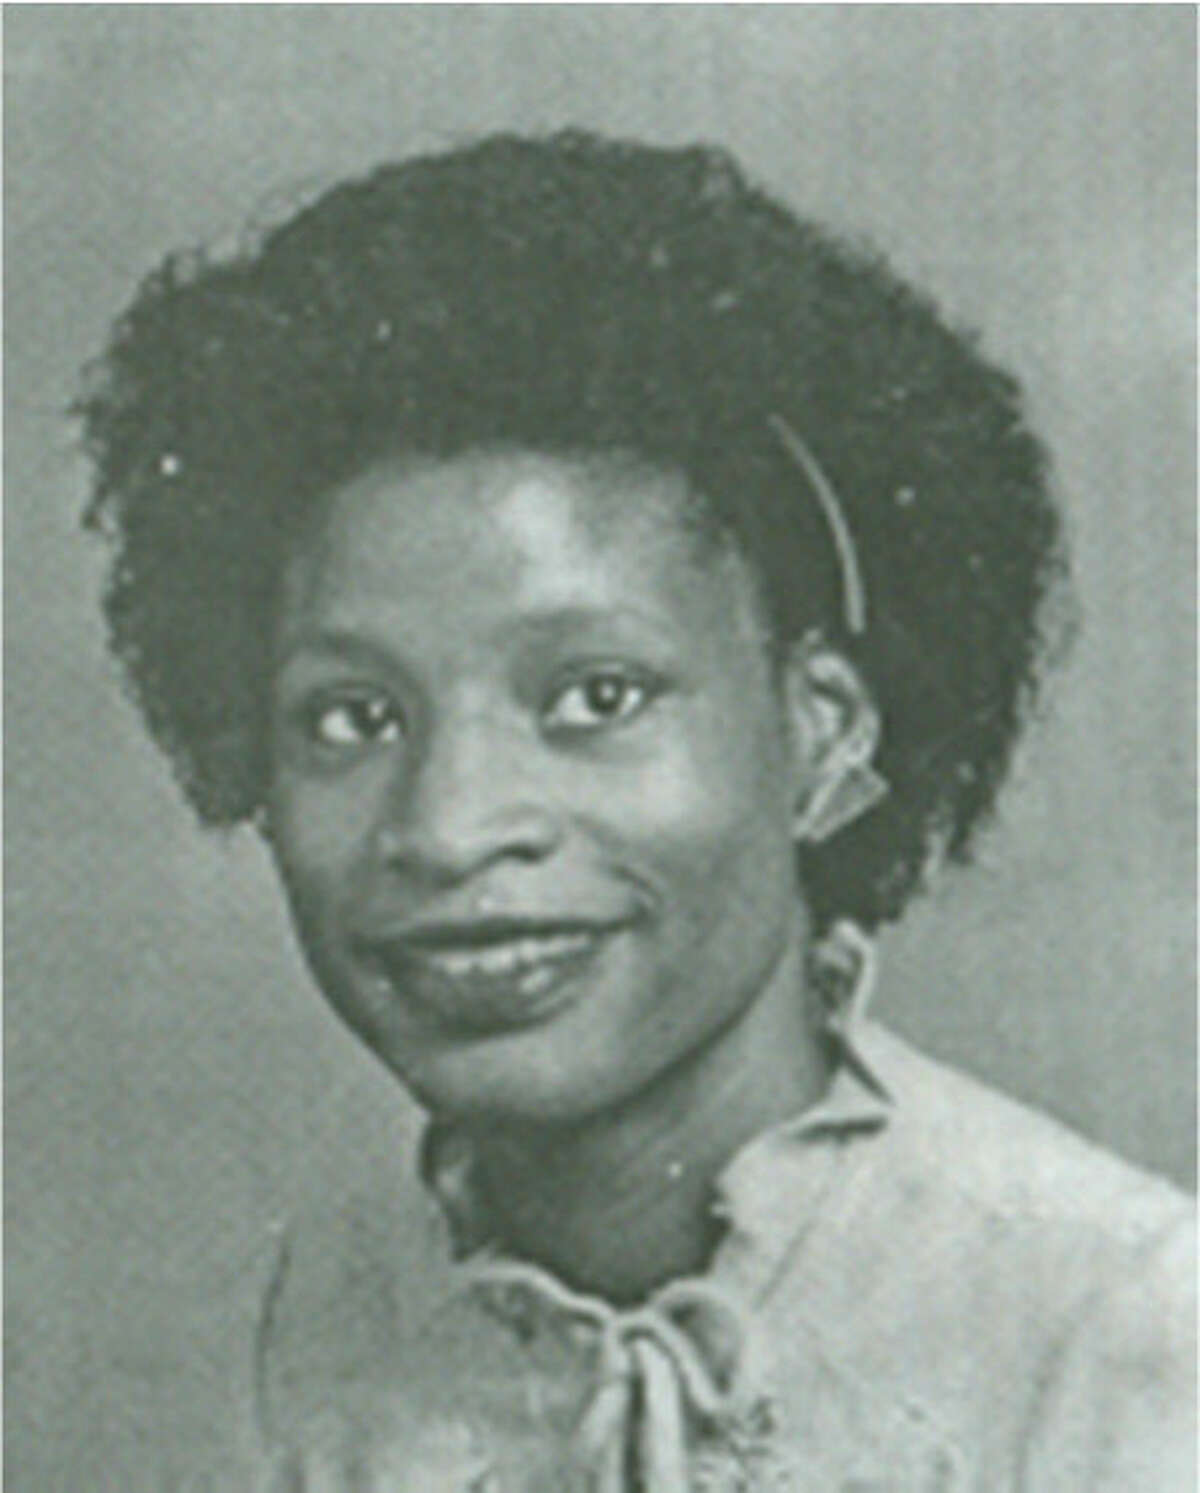 Connie Fulton  Case 91/634029 Connie Fulton was 26 years old when she was found stabbed to death in the school yard of Douglas Elementary on November 28, 1991.